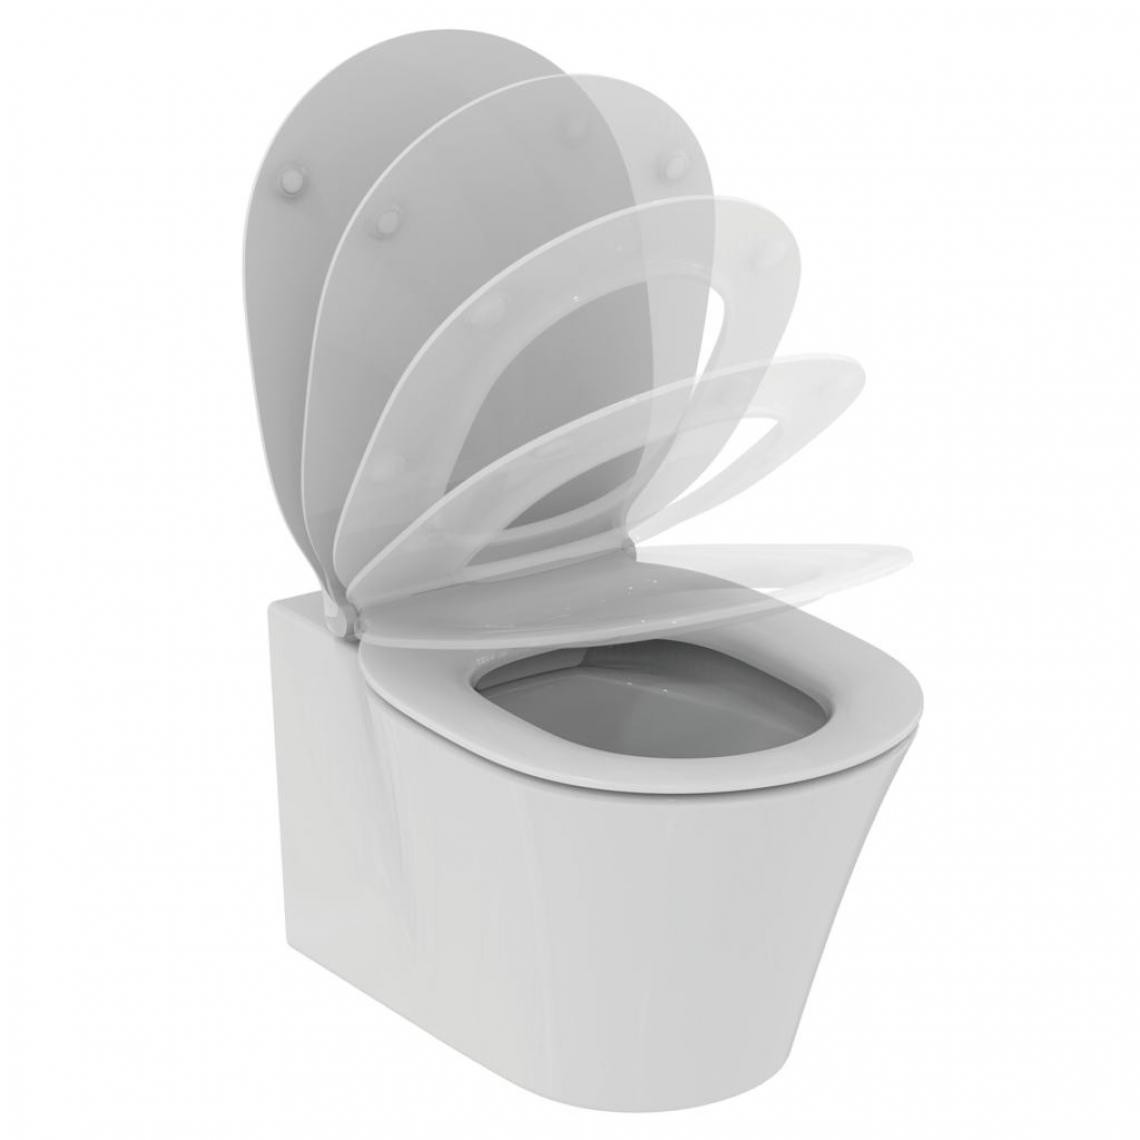 Ideal Standard - Ideal Standard - WC suspendu rimless avec fixation invisible Blanc - Connect Air - WC